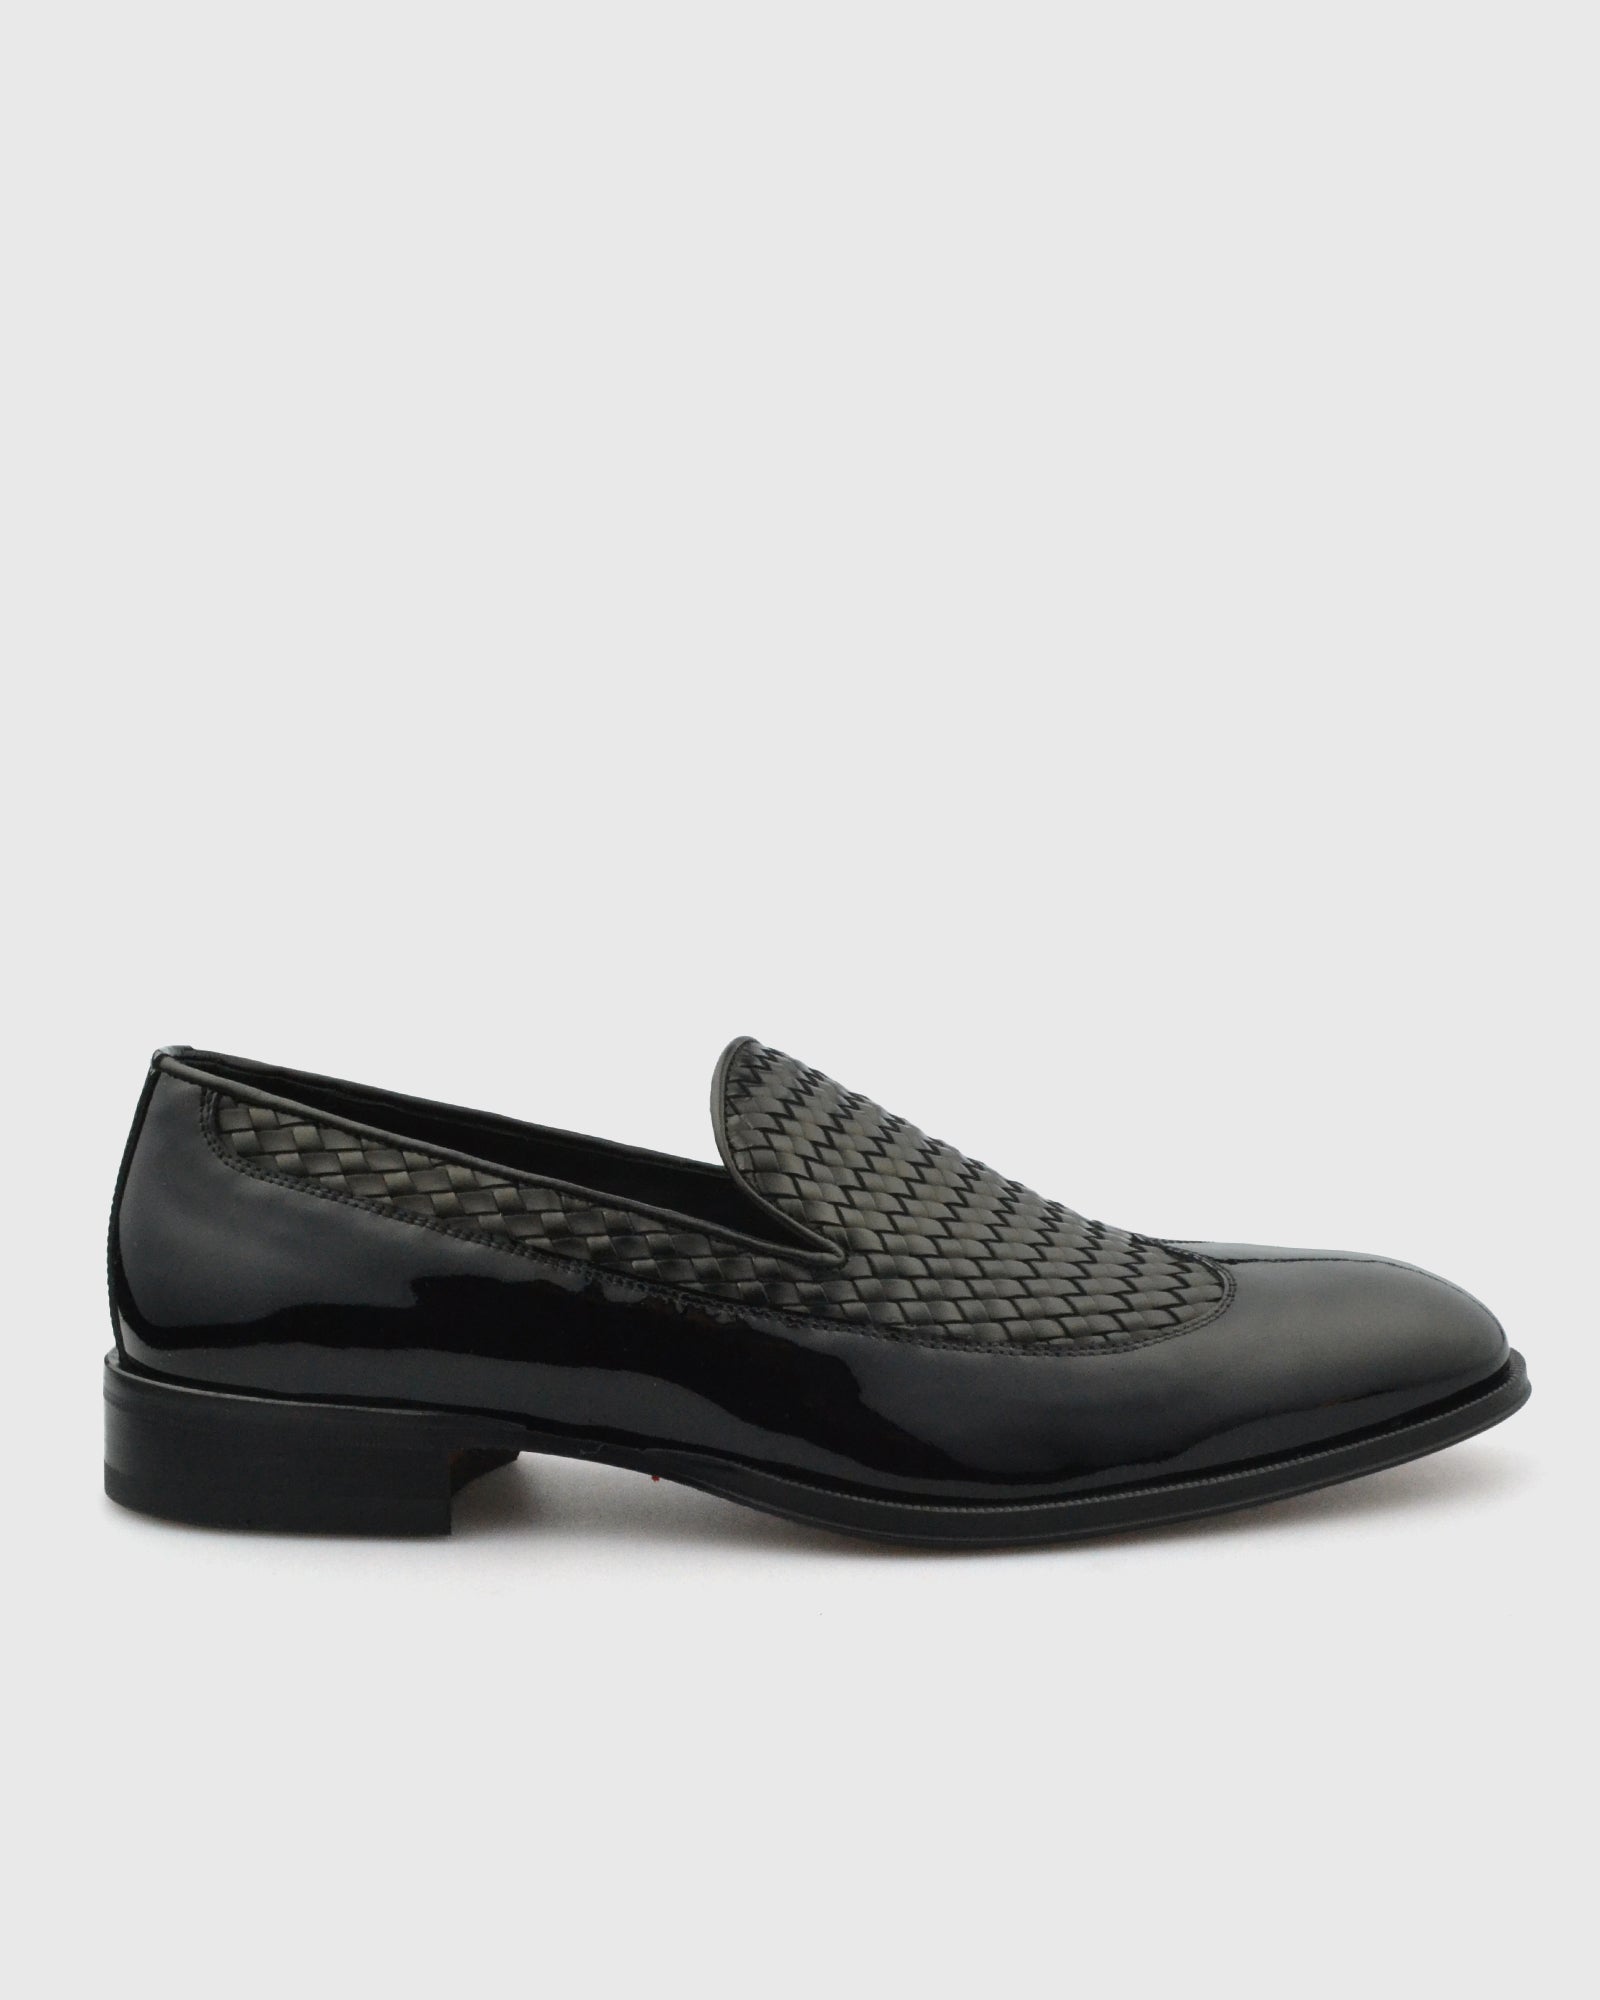 VINCENT & FRANKS VFW23LO SHINY BLACK PATENT & WOVEN LOAFER